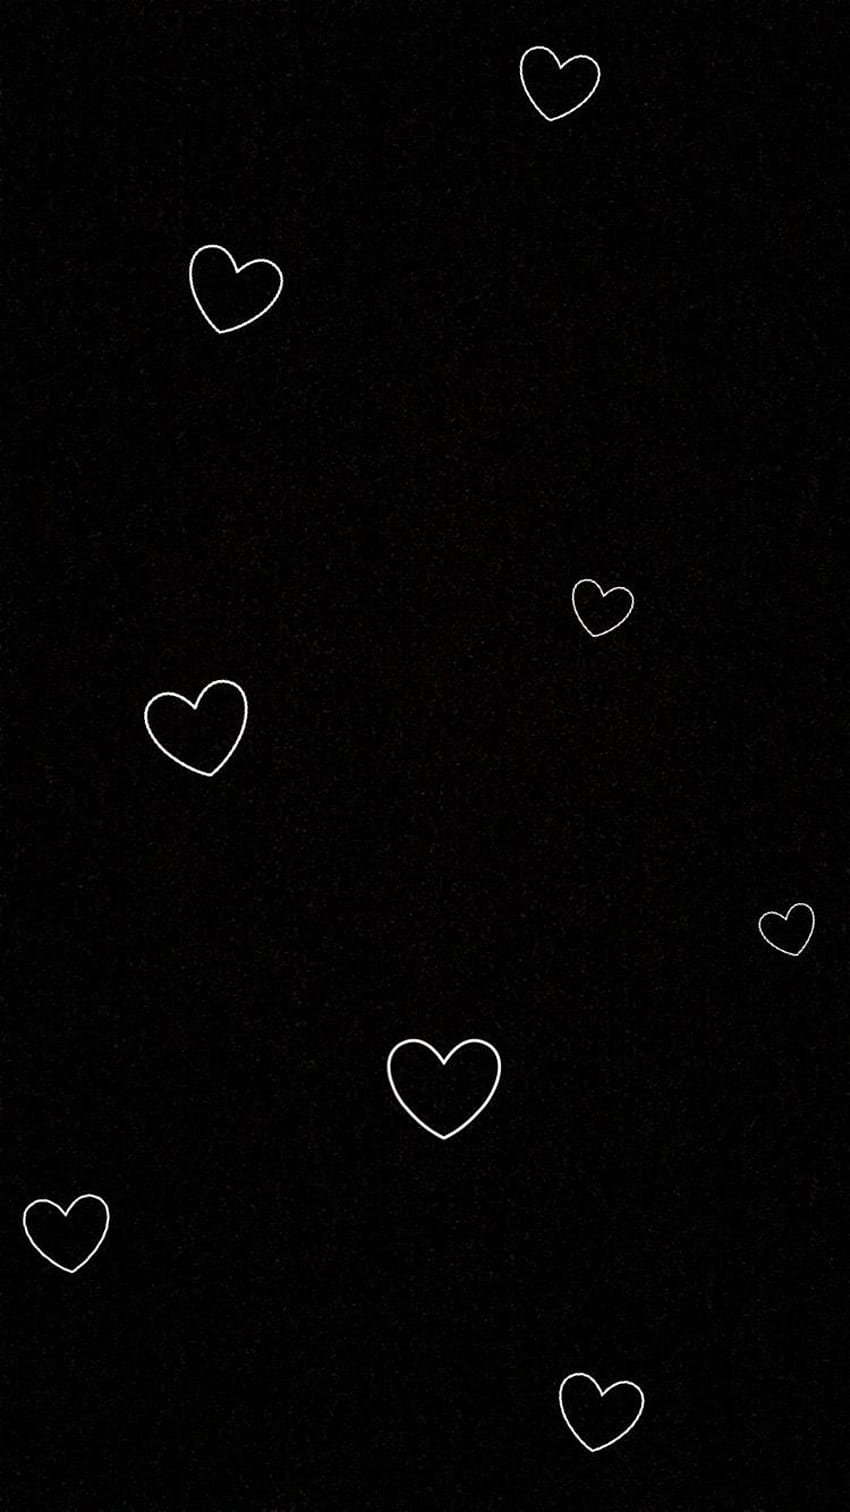 Black and white wallpaper with white hearts on a black background - Black heart